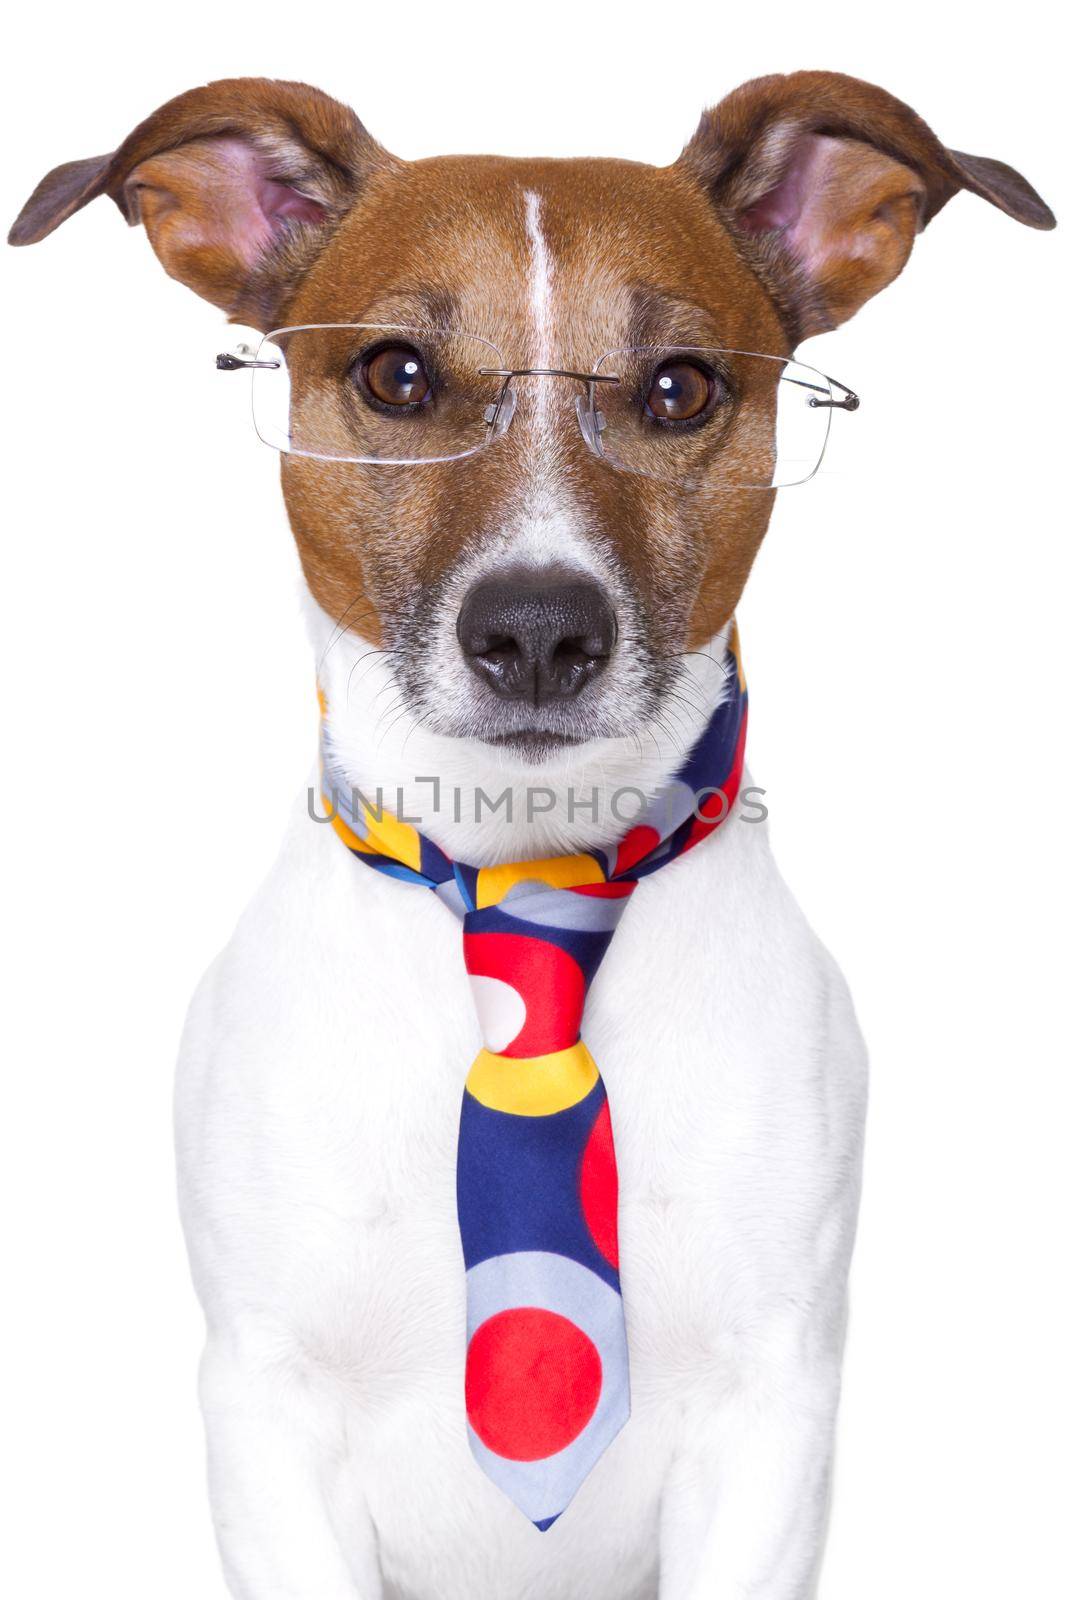 office dog wearing funny  tie and glasses